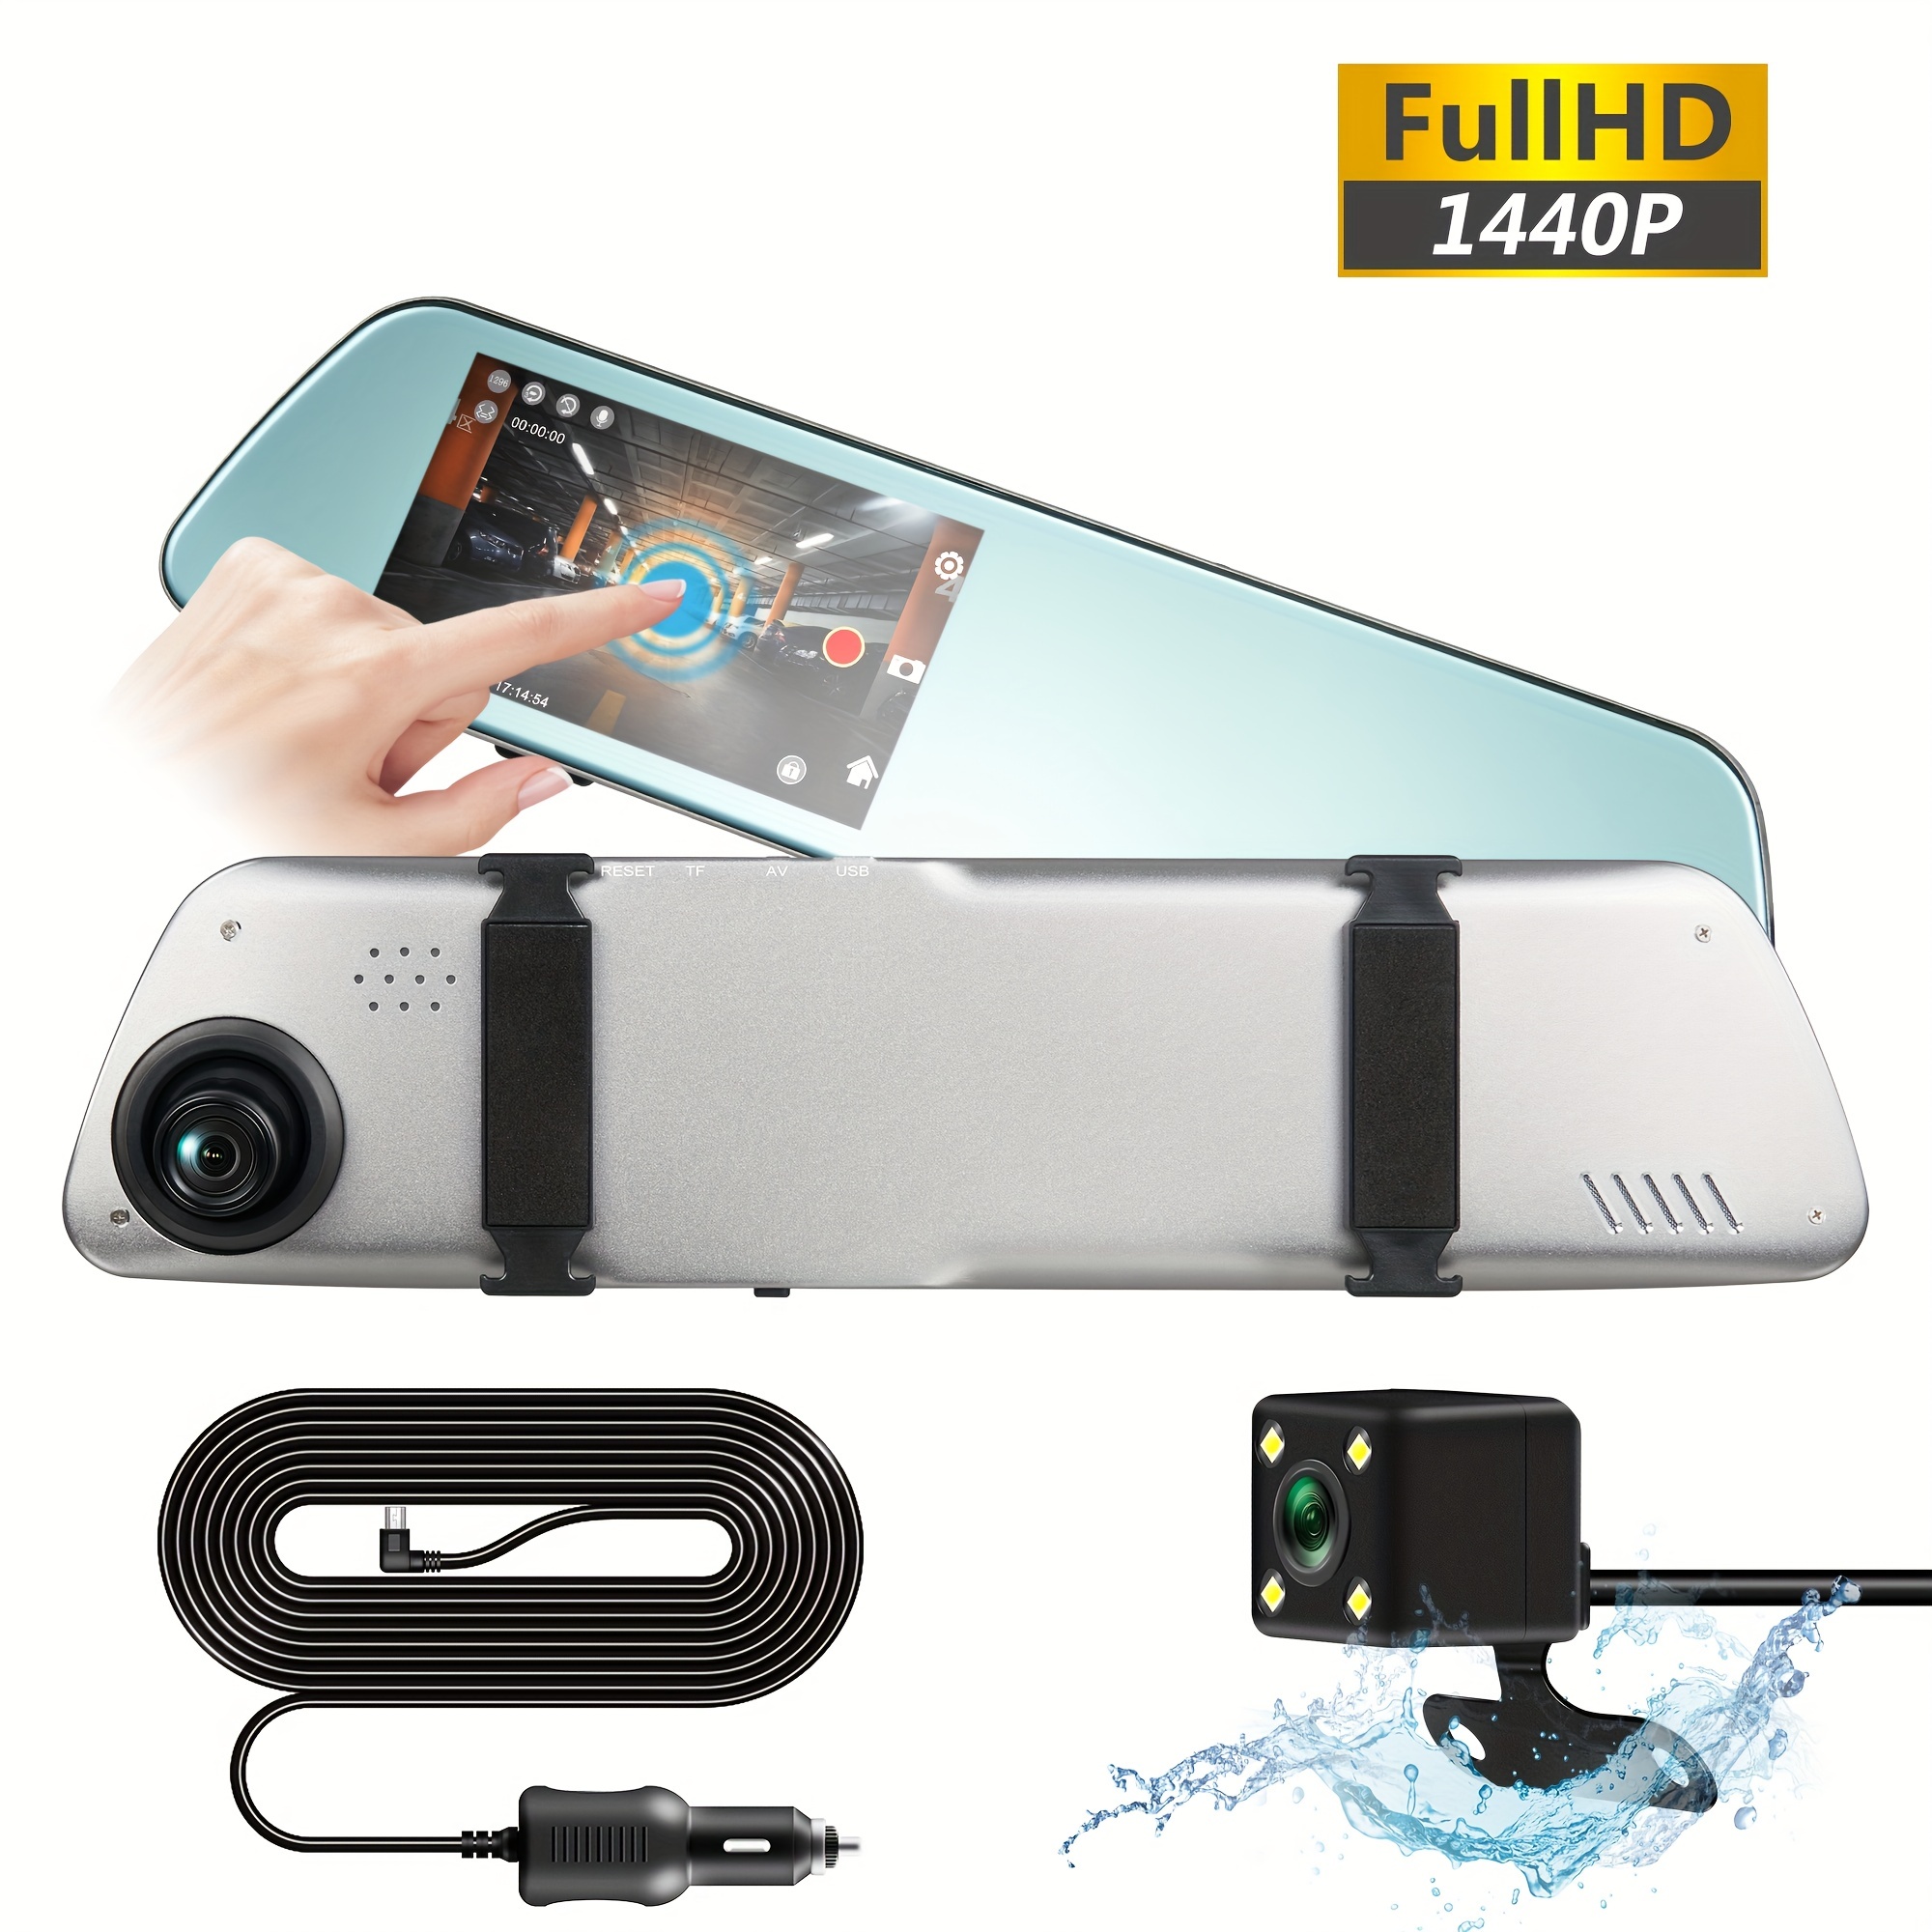 Toguard 1080p Mirror Dash Cam for Cars with 10-Inch IPS Full Touch SCR